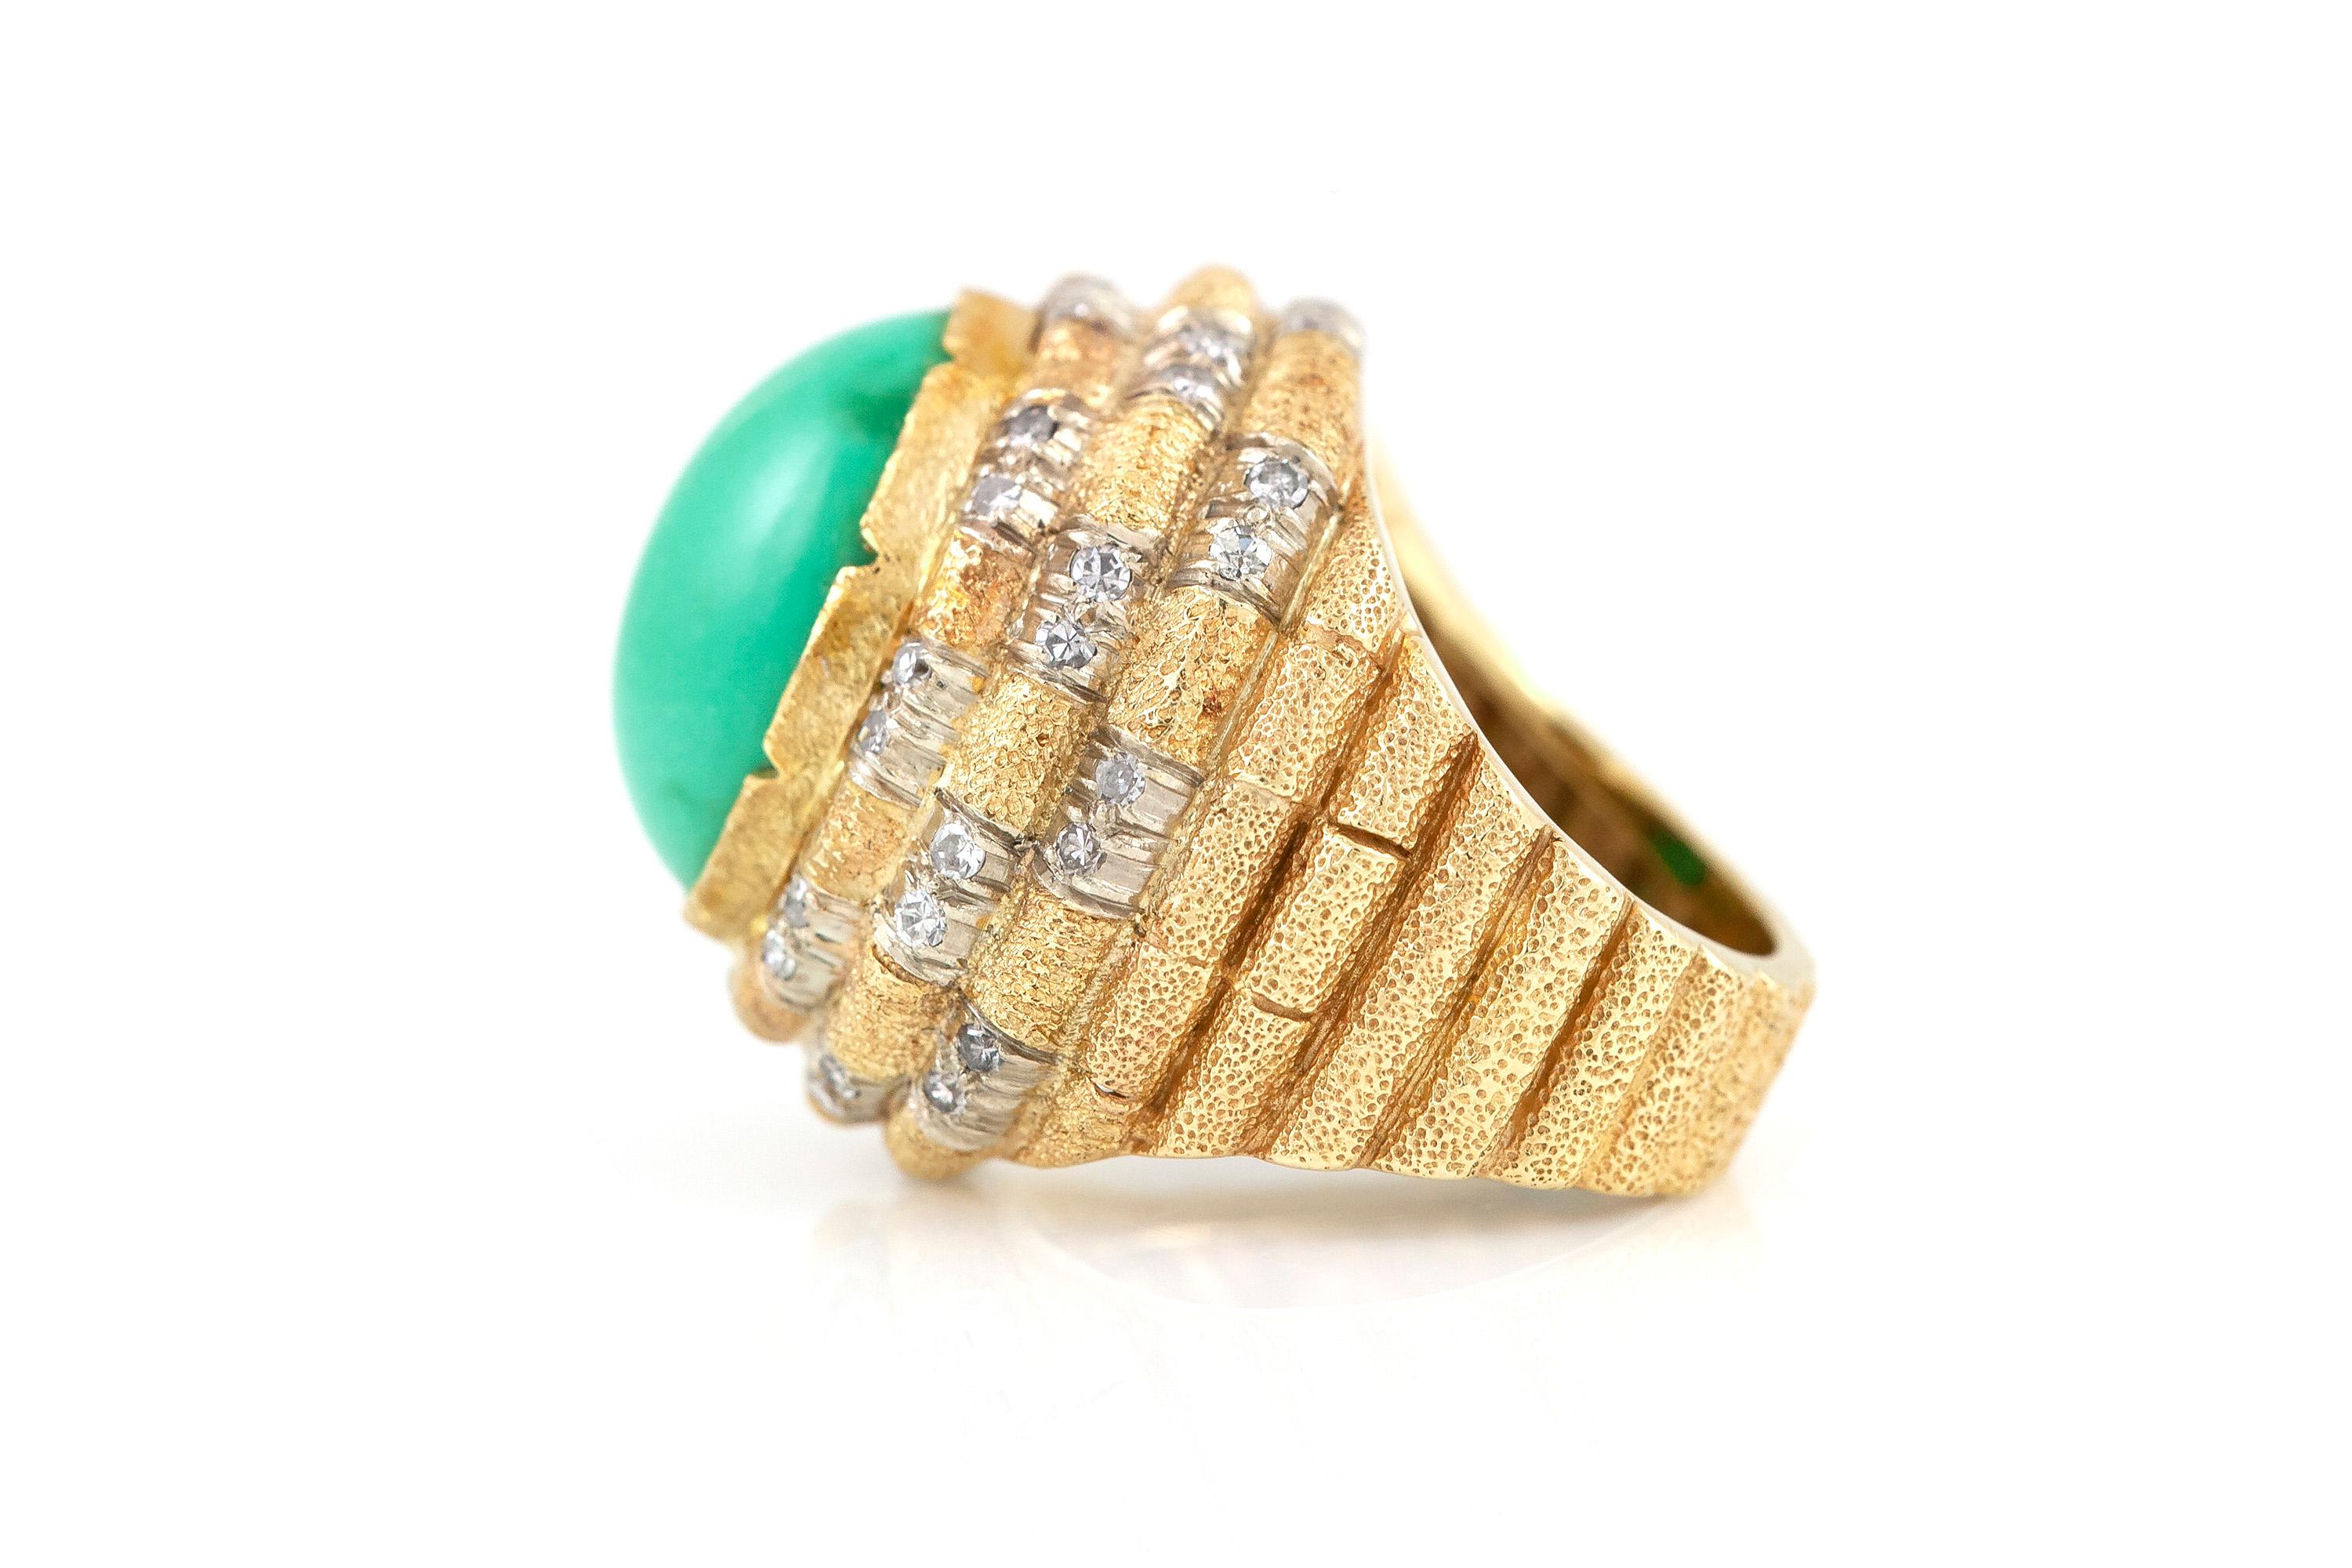 Cocktail ring finely crafted in 14k gold, weighing a total of 12.8 dwt, with a center turquoise stone, and diamonds weighing 1.00 karat. Circa 1980.